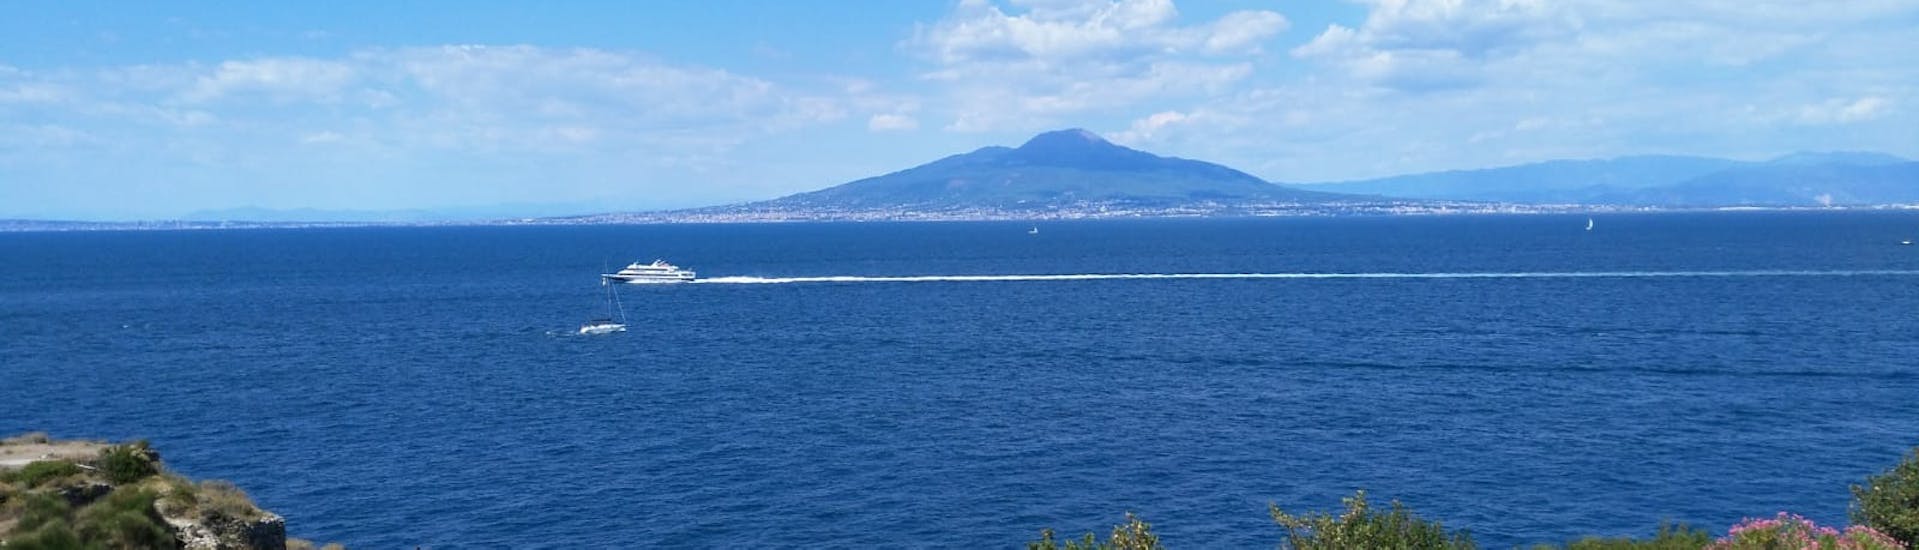 A boat trip with Vesuvius in the background is what awaits you during the Sunrise Sorrento Private Boat Tour.